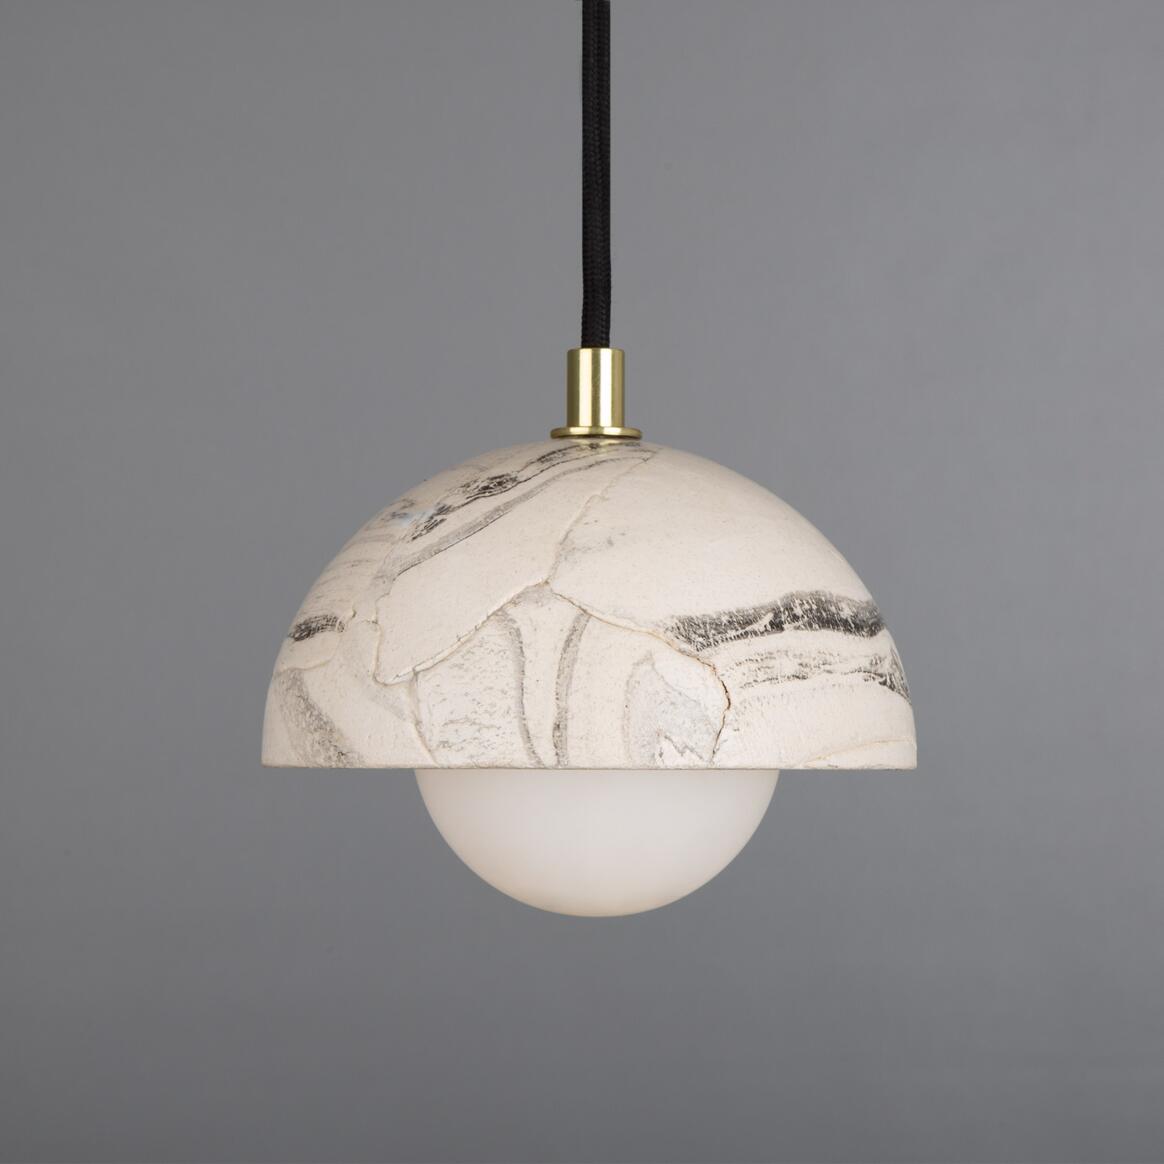 Ferox Small Marbled Ceramic Dome Pendant Light 5.5" main product image